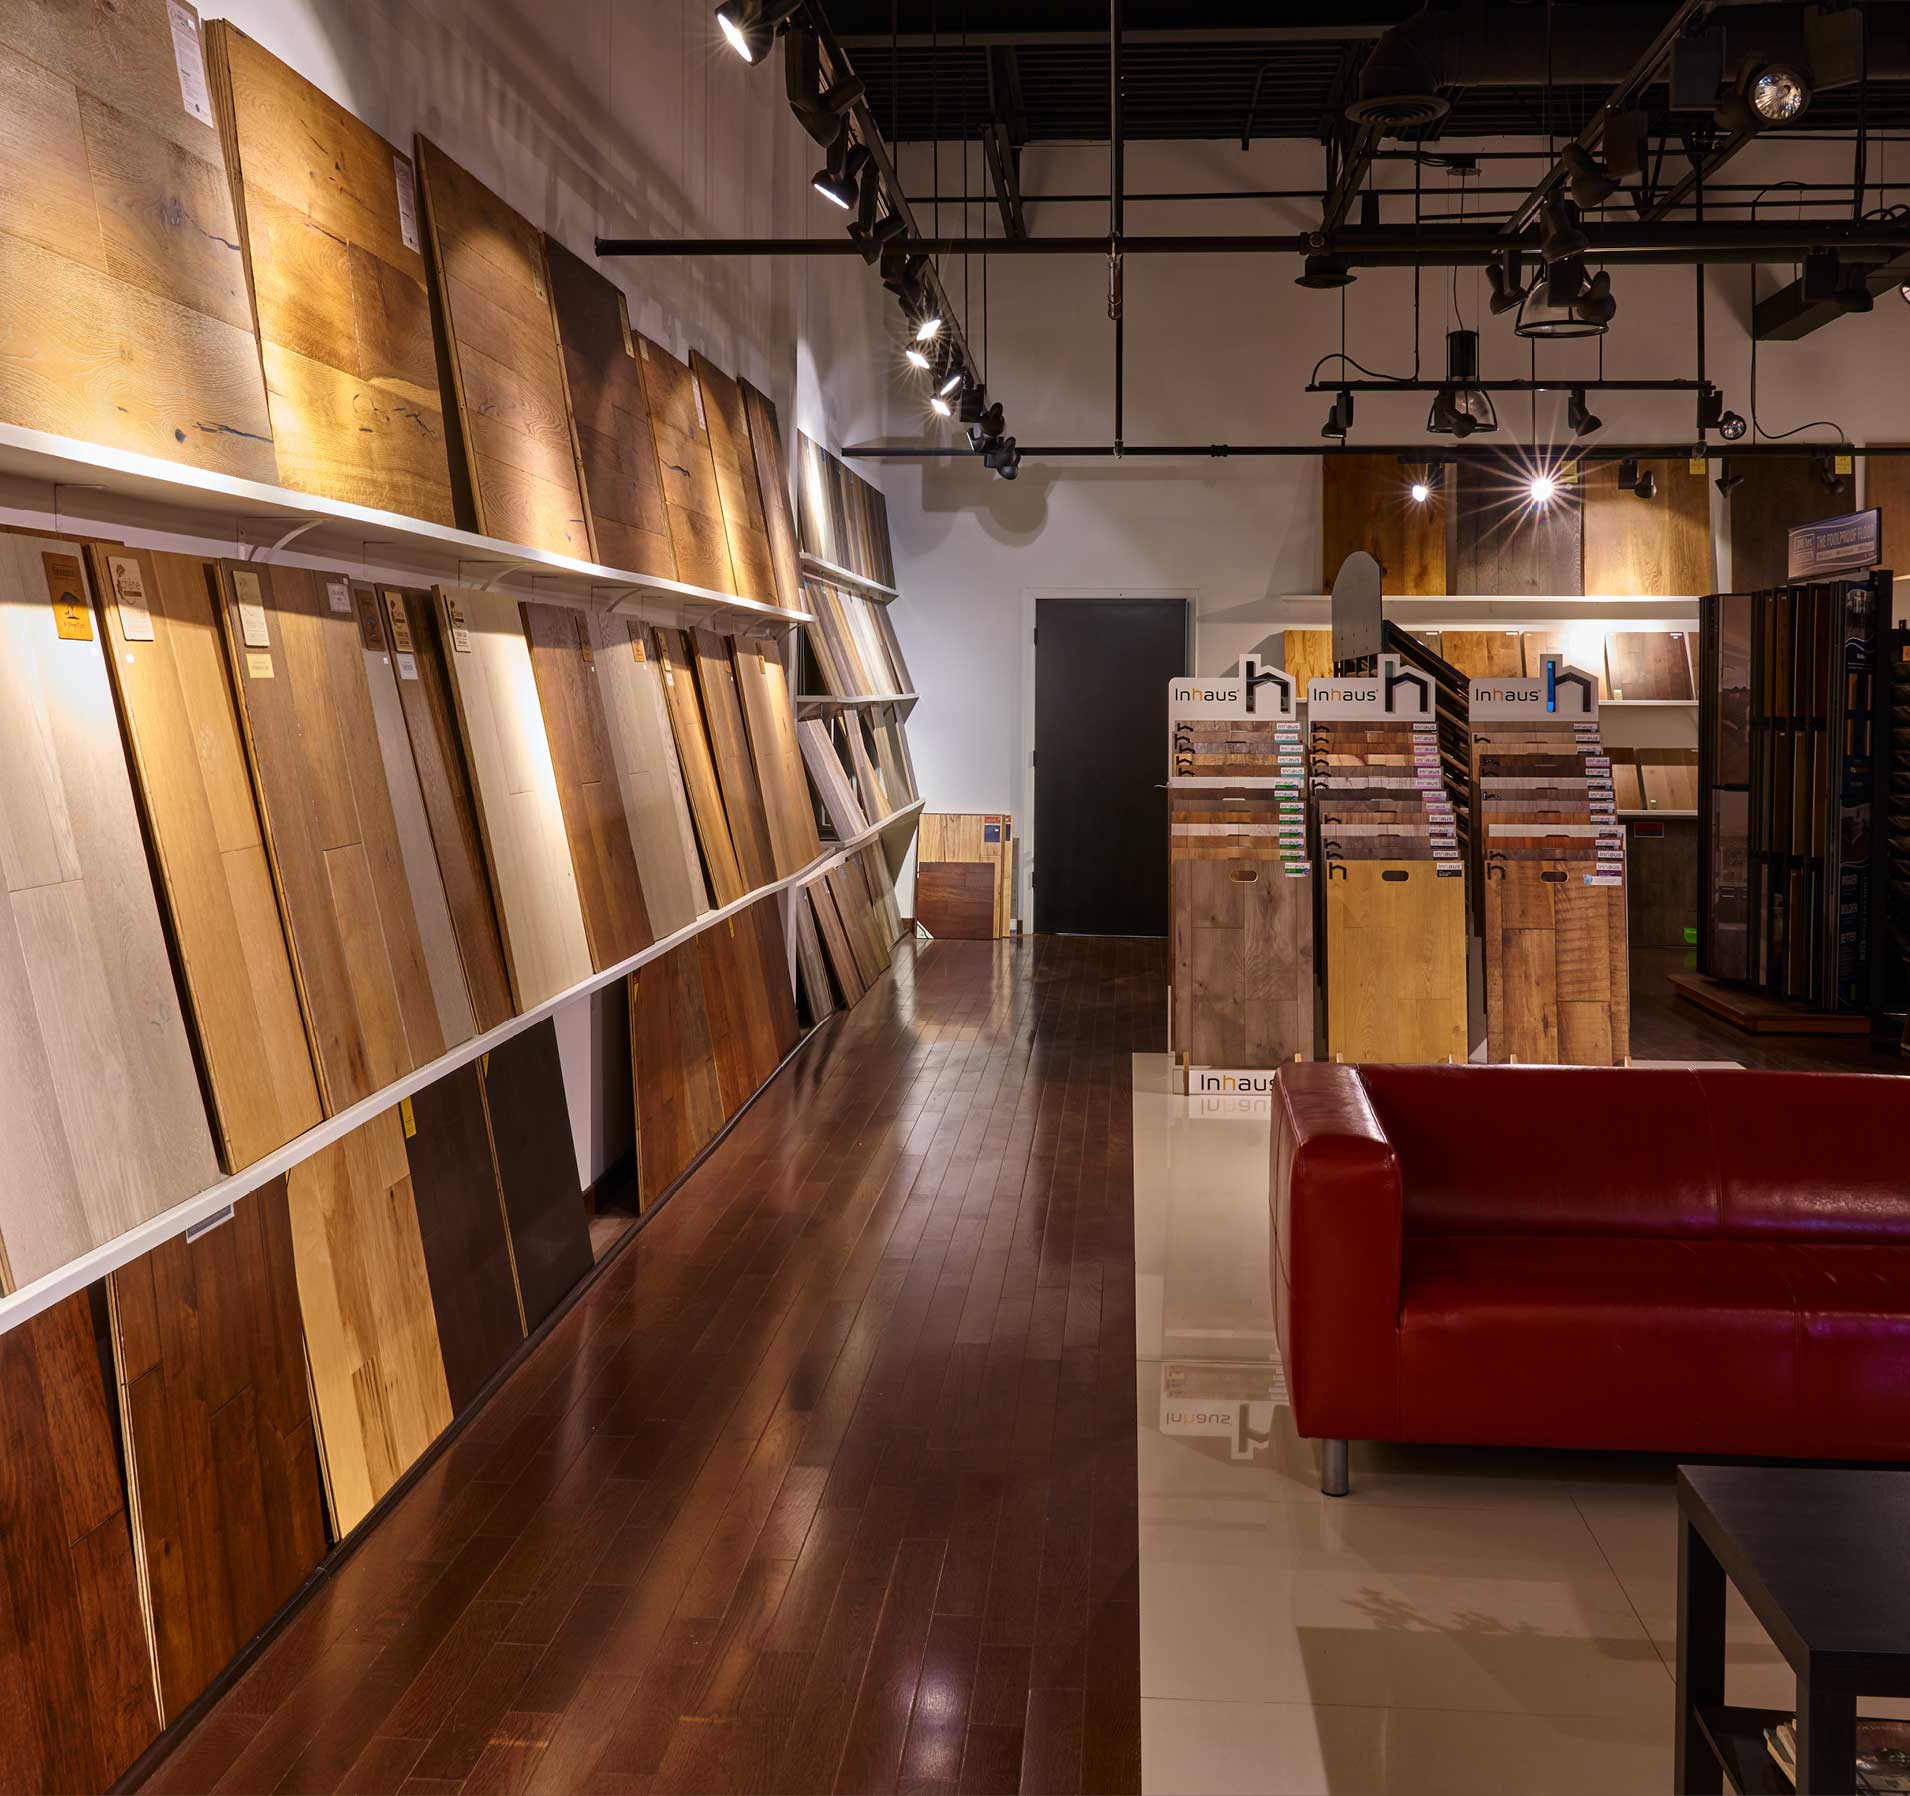 The interior of the Dream Floors showroom features hundreds of flooring options.